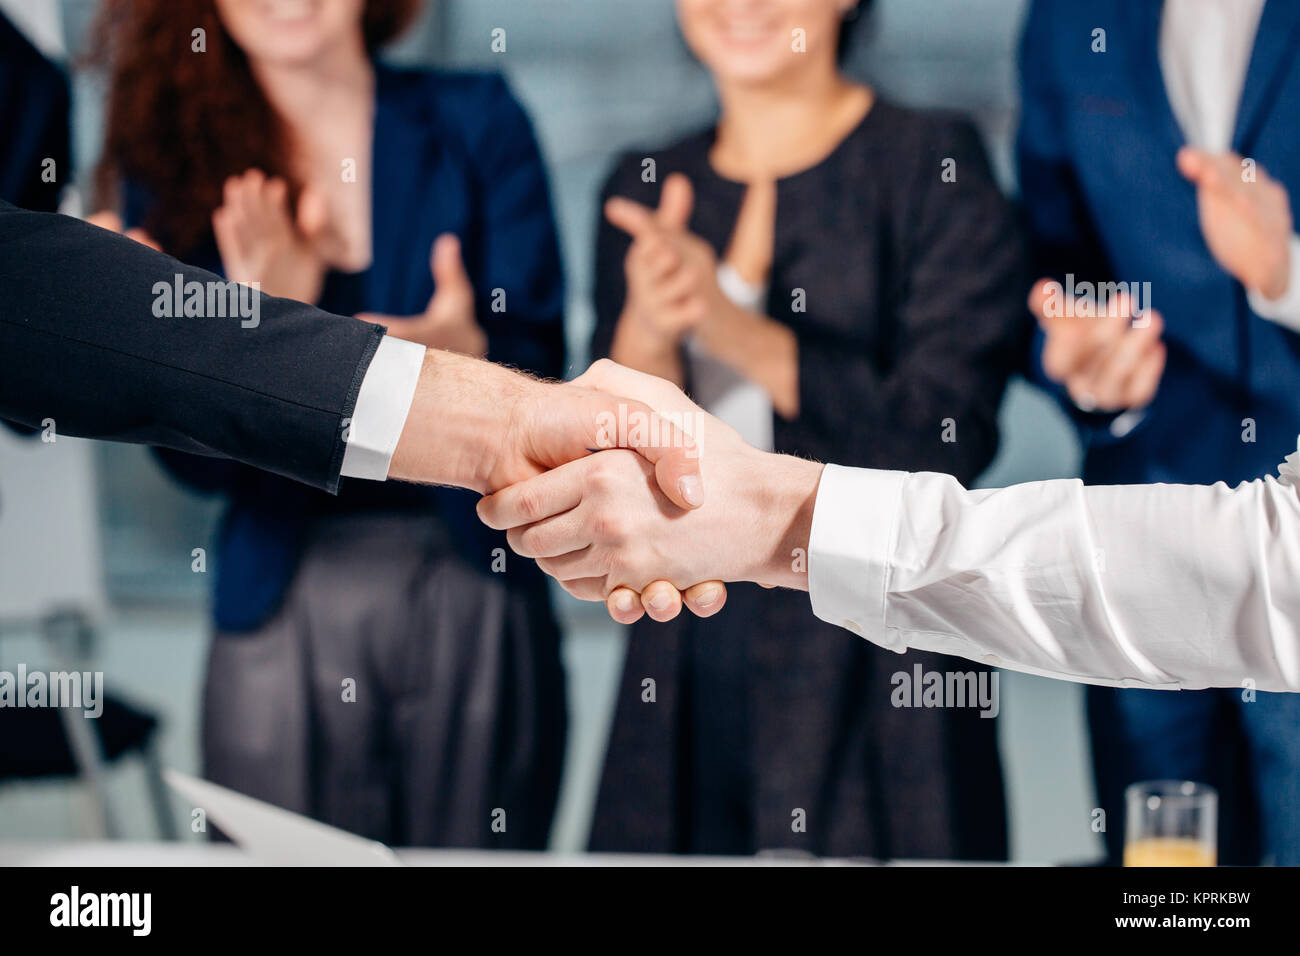 Business People Handshake Greeting Deal Concept Stock Photo